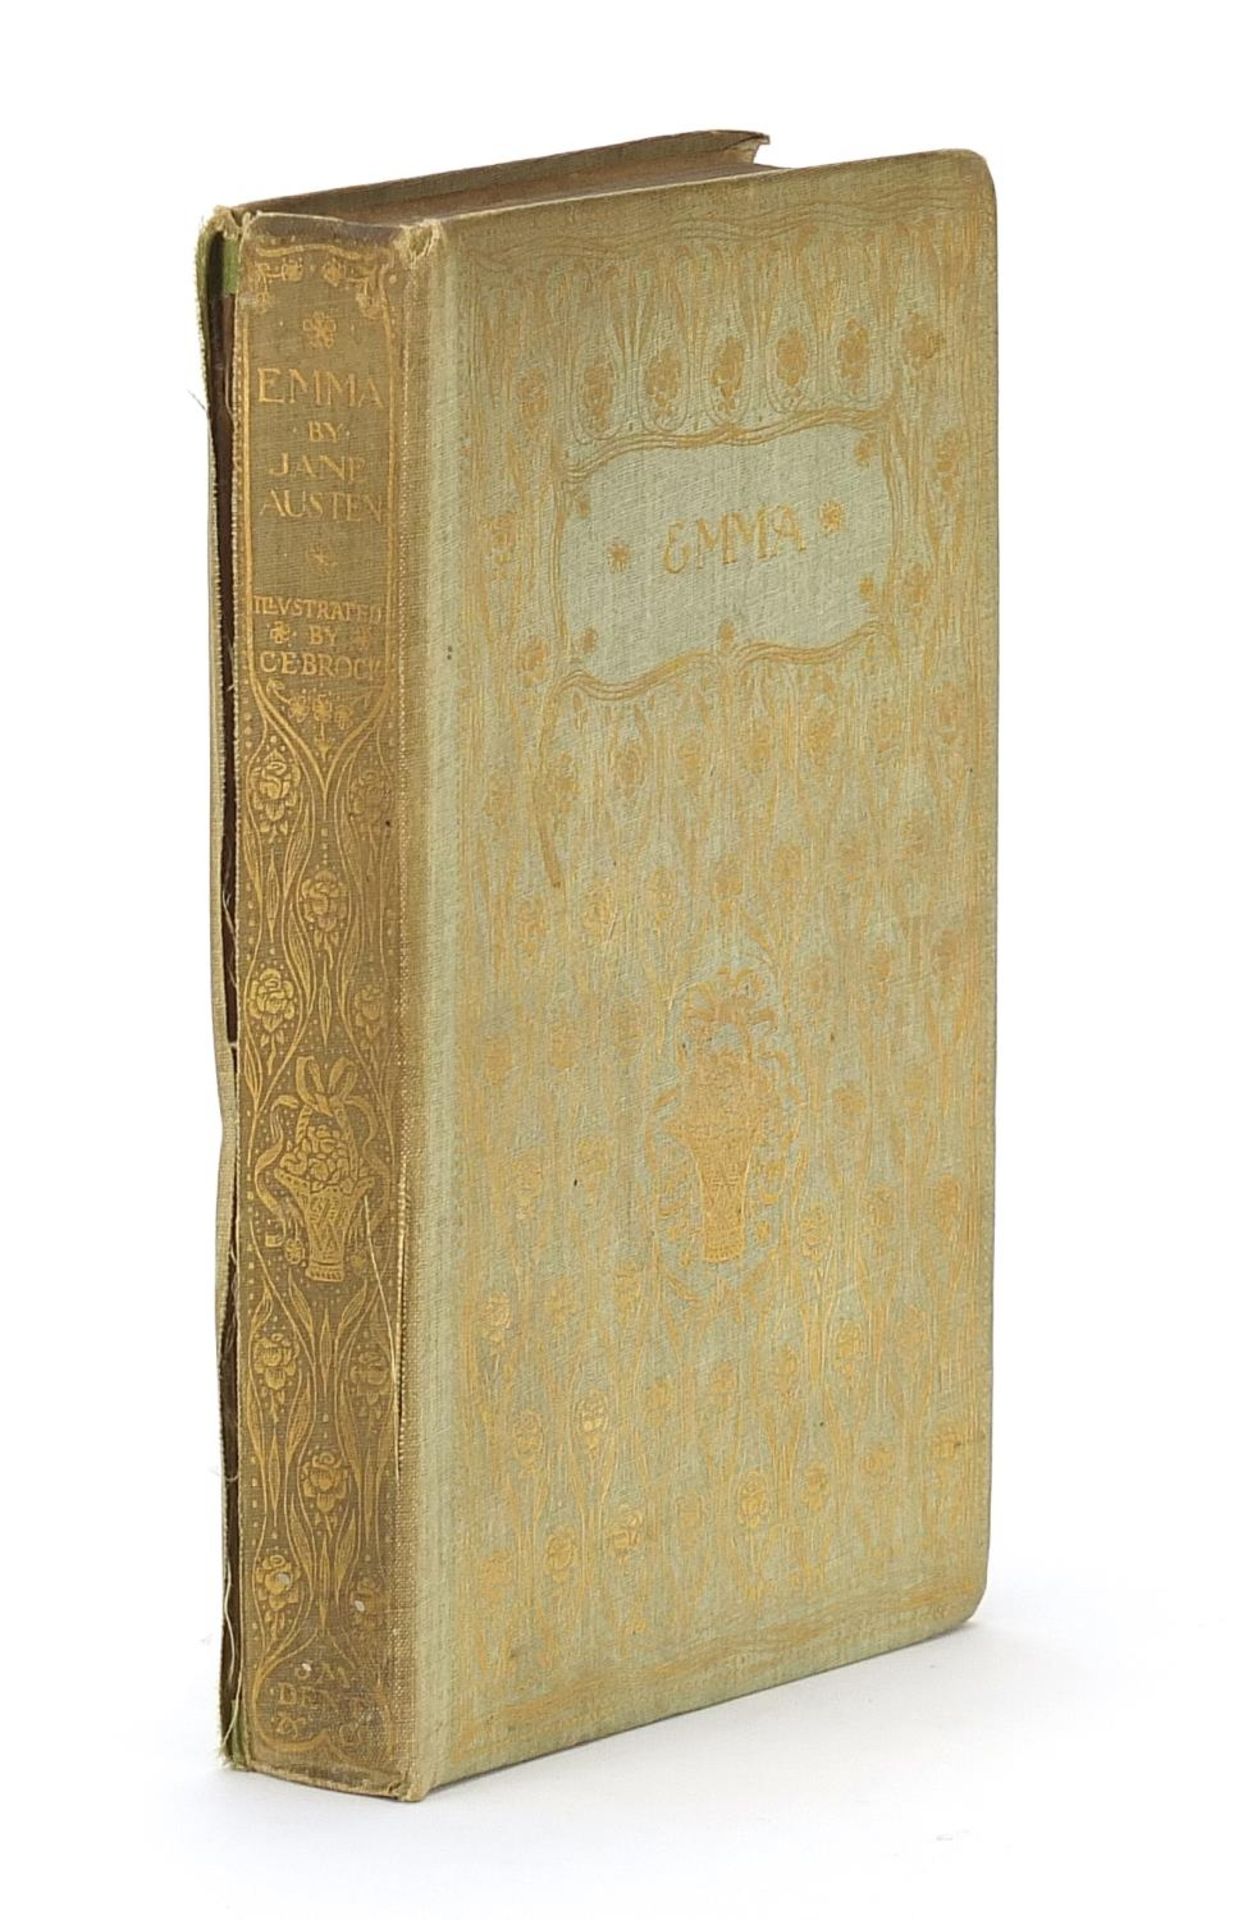 Emma by Jane Austen, hardback book published 1909 : For Further Condition Reports Please Visit Our